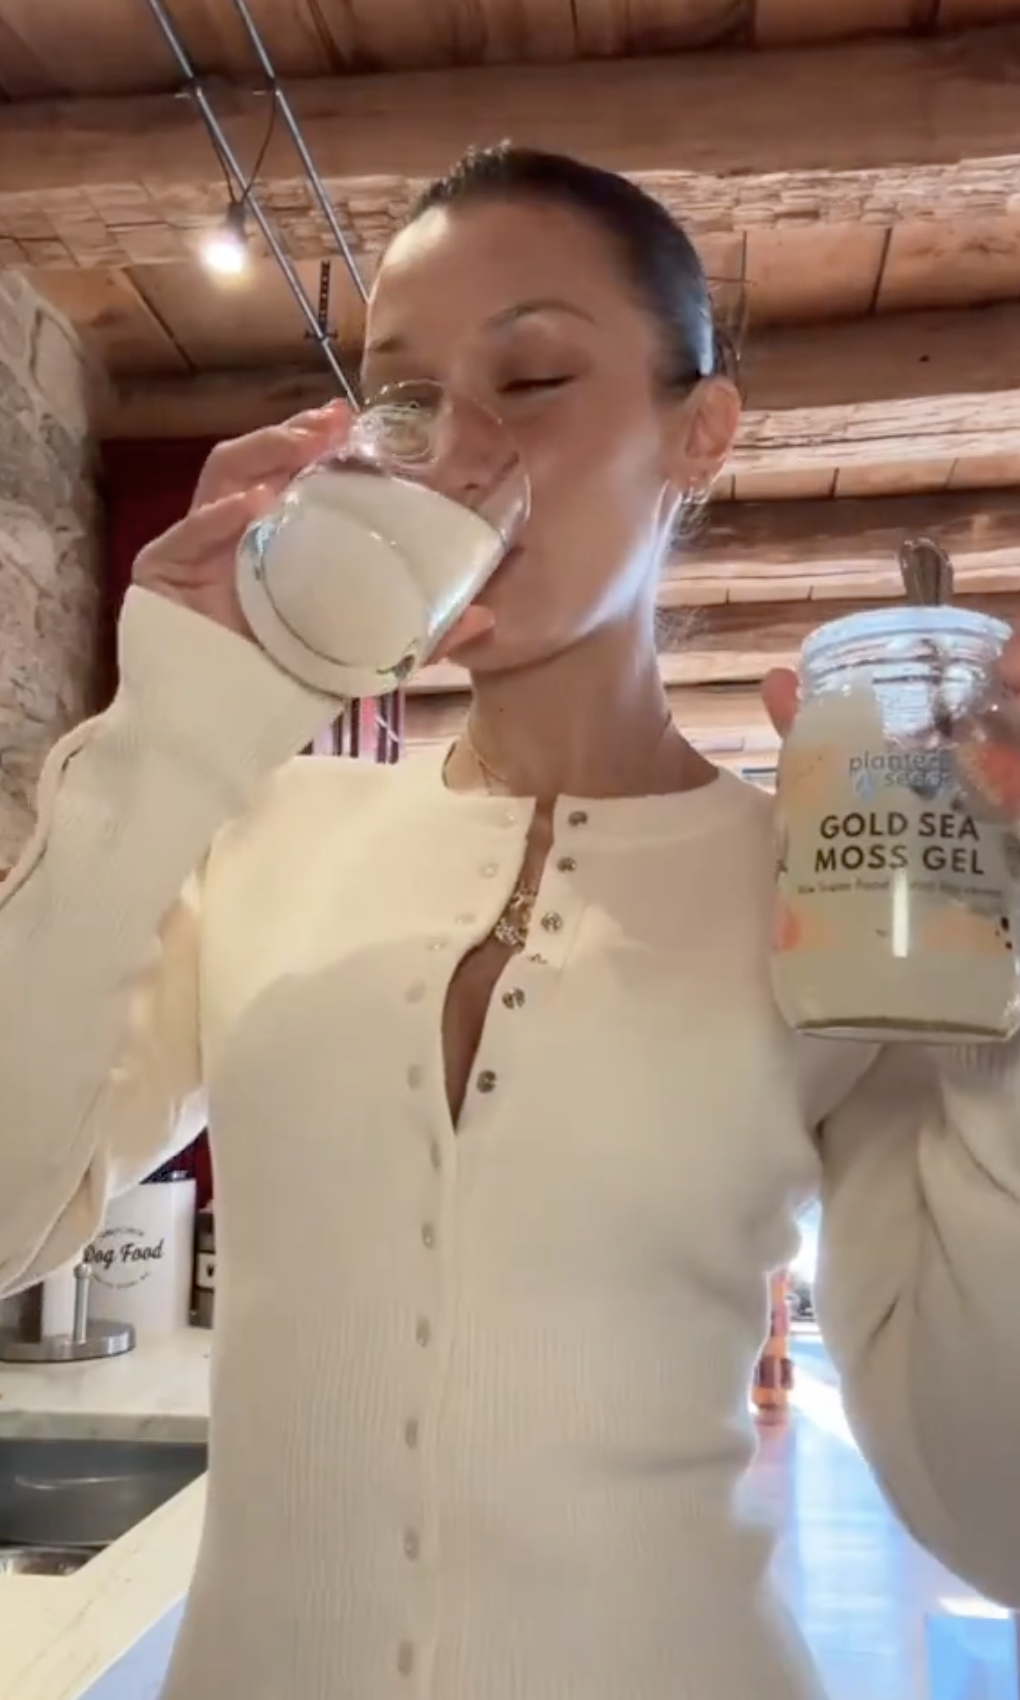 Bella in a buttoned top drinking a glass of a pale, cloudy beverage, holding a jar labeled &quot;Gold Sea Moss Gel&quot;